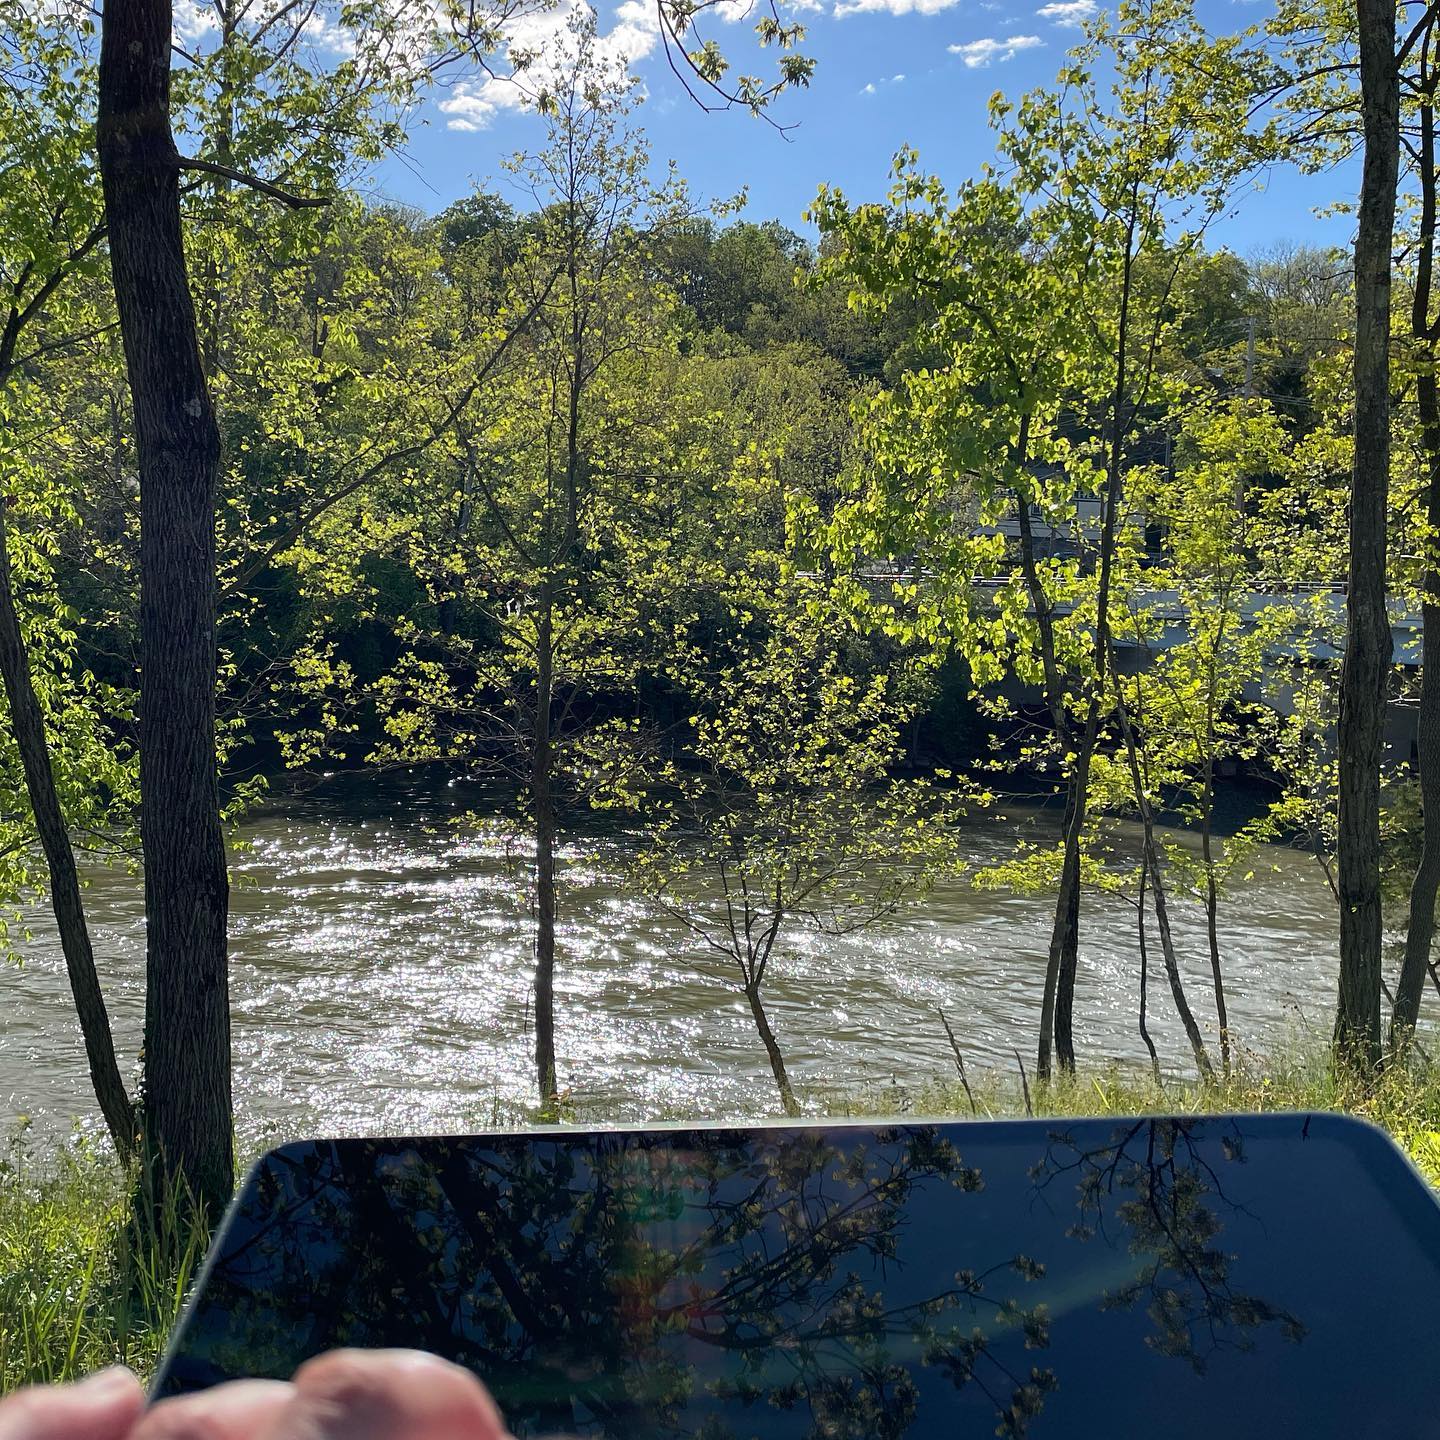 Writing my book beside the Little Miami River (with an IPA). Fly fingers, fly!